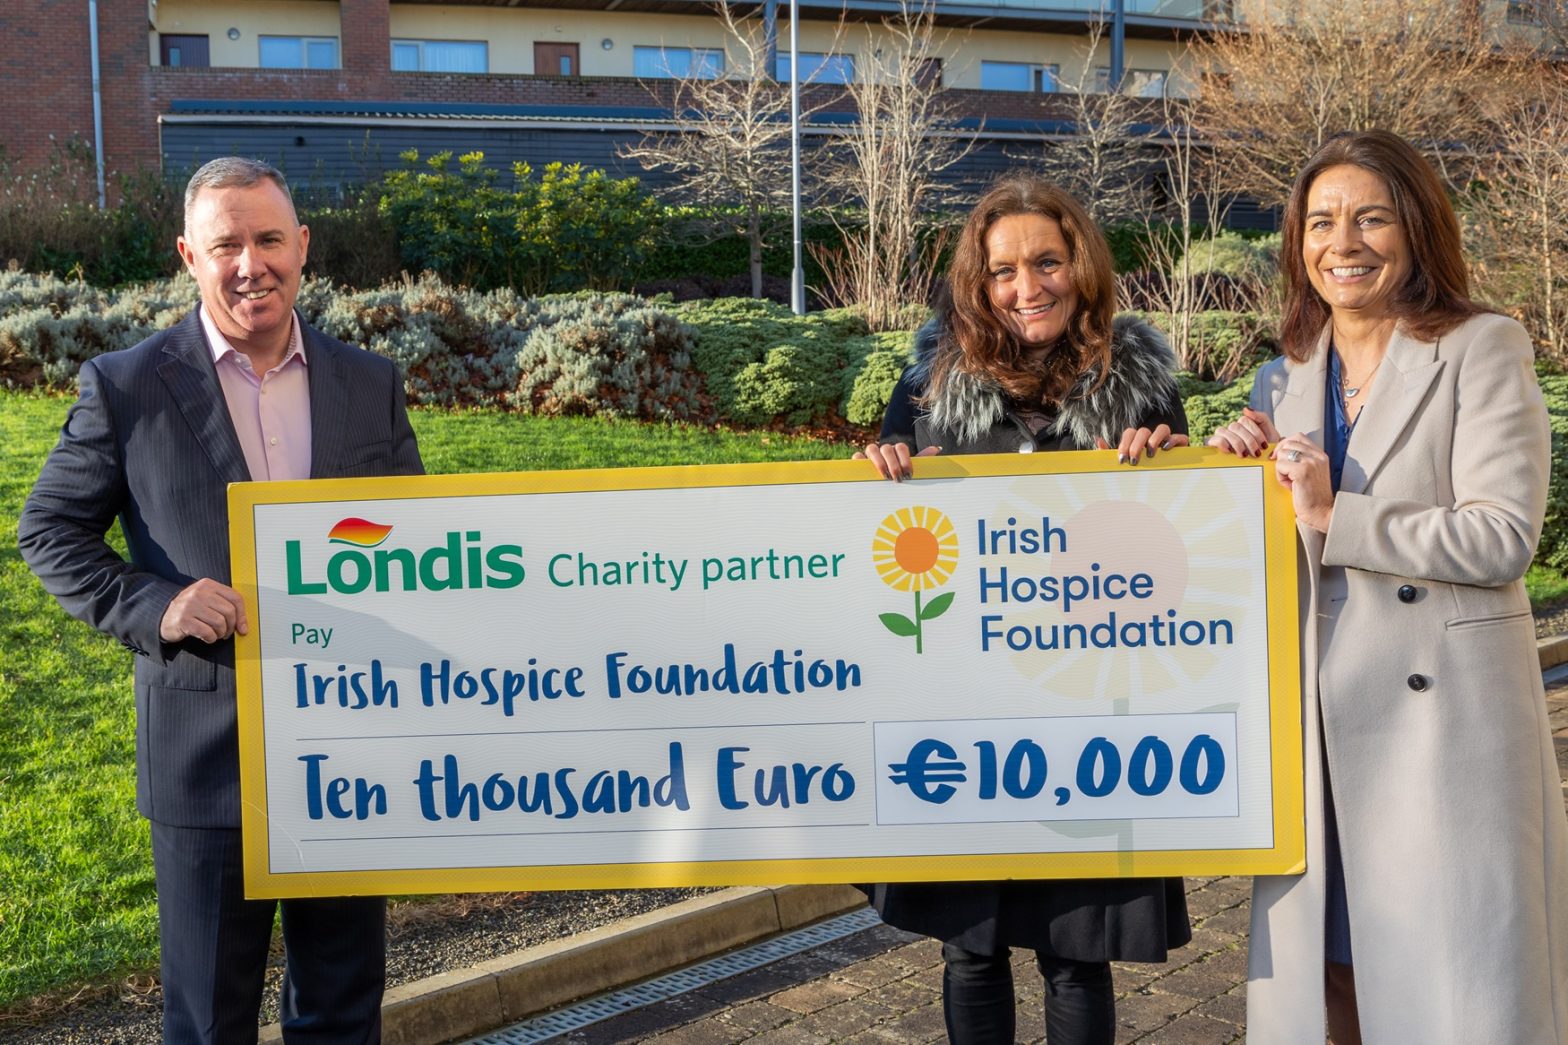 Pictured at the announcement of Londis new charity partnership with Irish Hospice Foundation for the next two years were Conor Hayes, Londis Sales Director with Paula OReilly, Irish Hospice Foundation Chief Executive Officer and Helen McVeigh, Irish Hospice Foundation Director of Fundraising